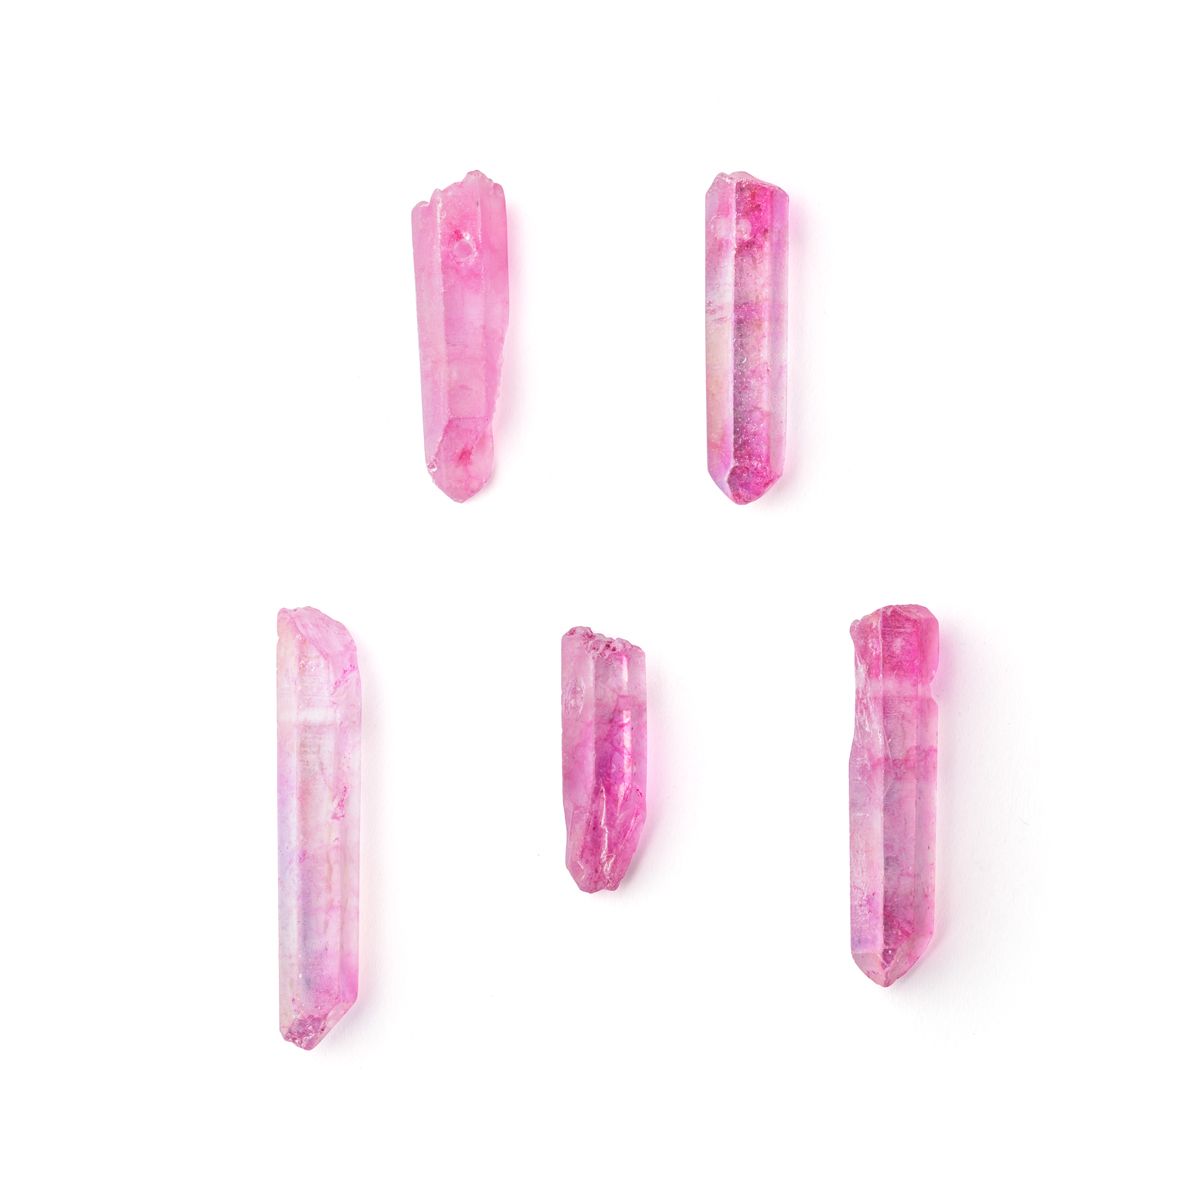 Mystic Pink Quartz Points, Approx 15x6mm to 50x20mm, Pack of 10 Points